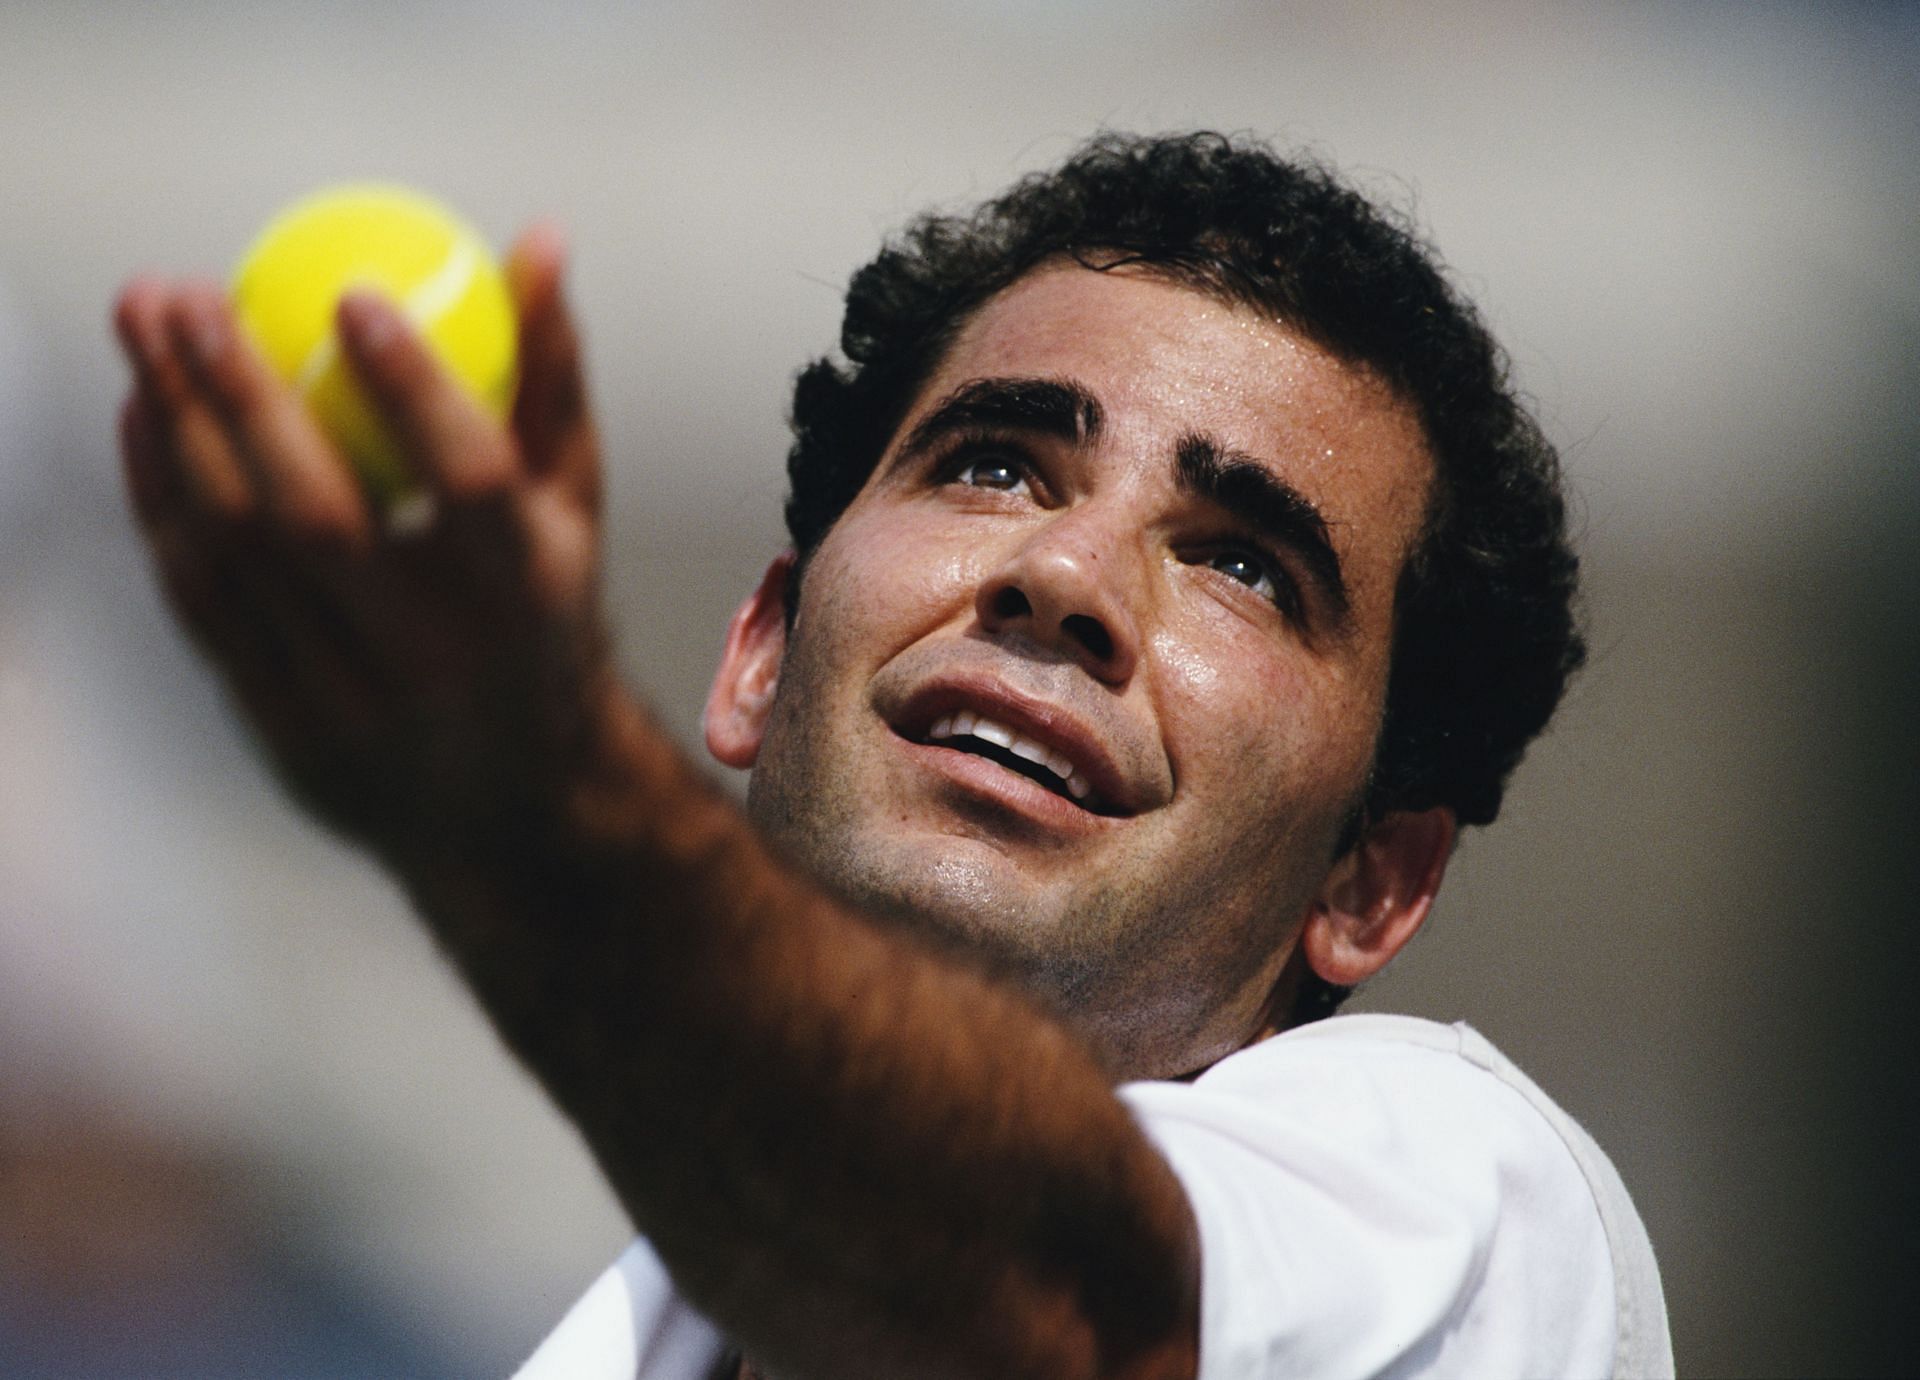 Pete Sampras during the 2000 US Open